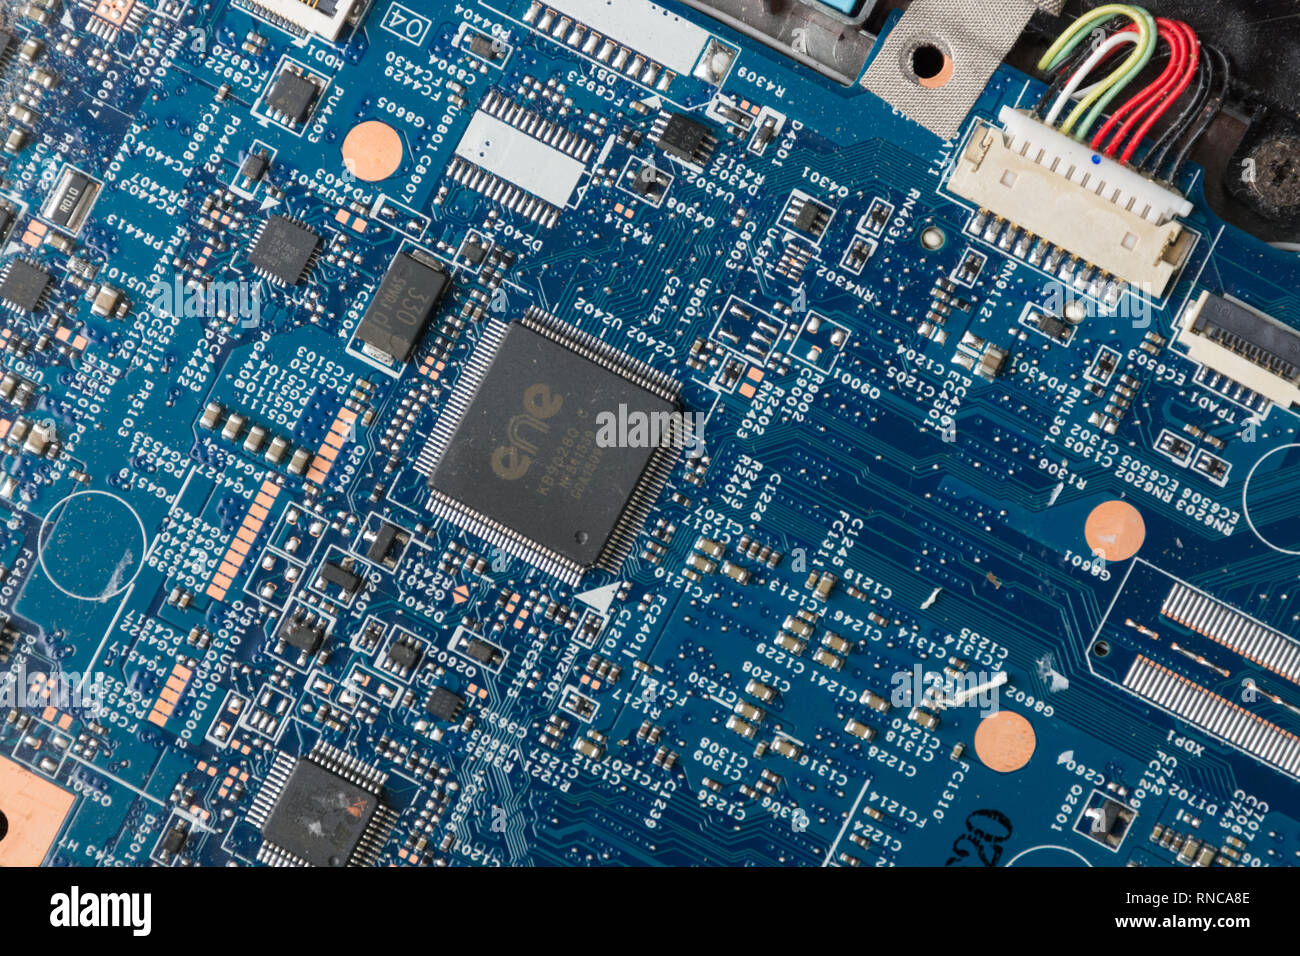 Close-up of a motherboard (printed circuit board) from a laptop computer Stock Photo